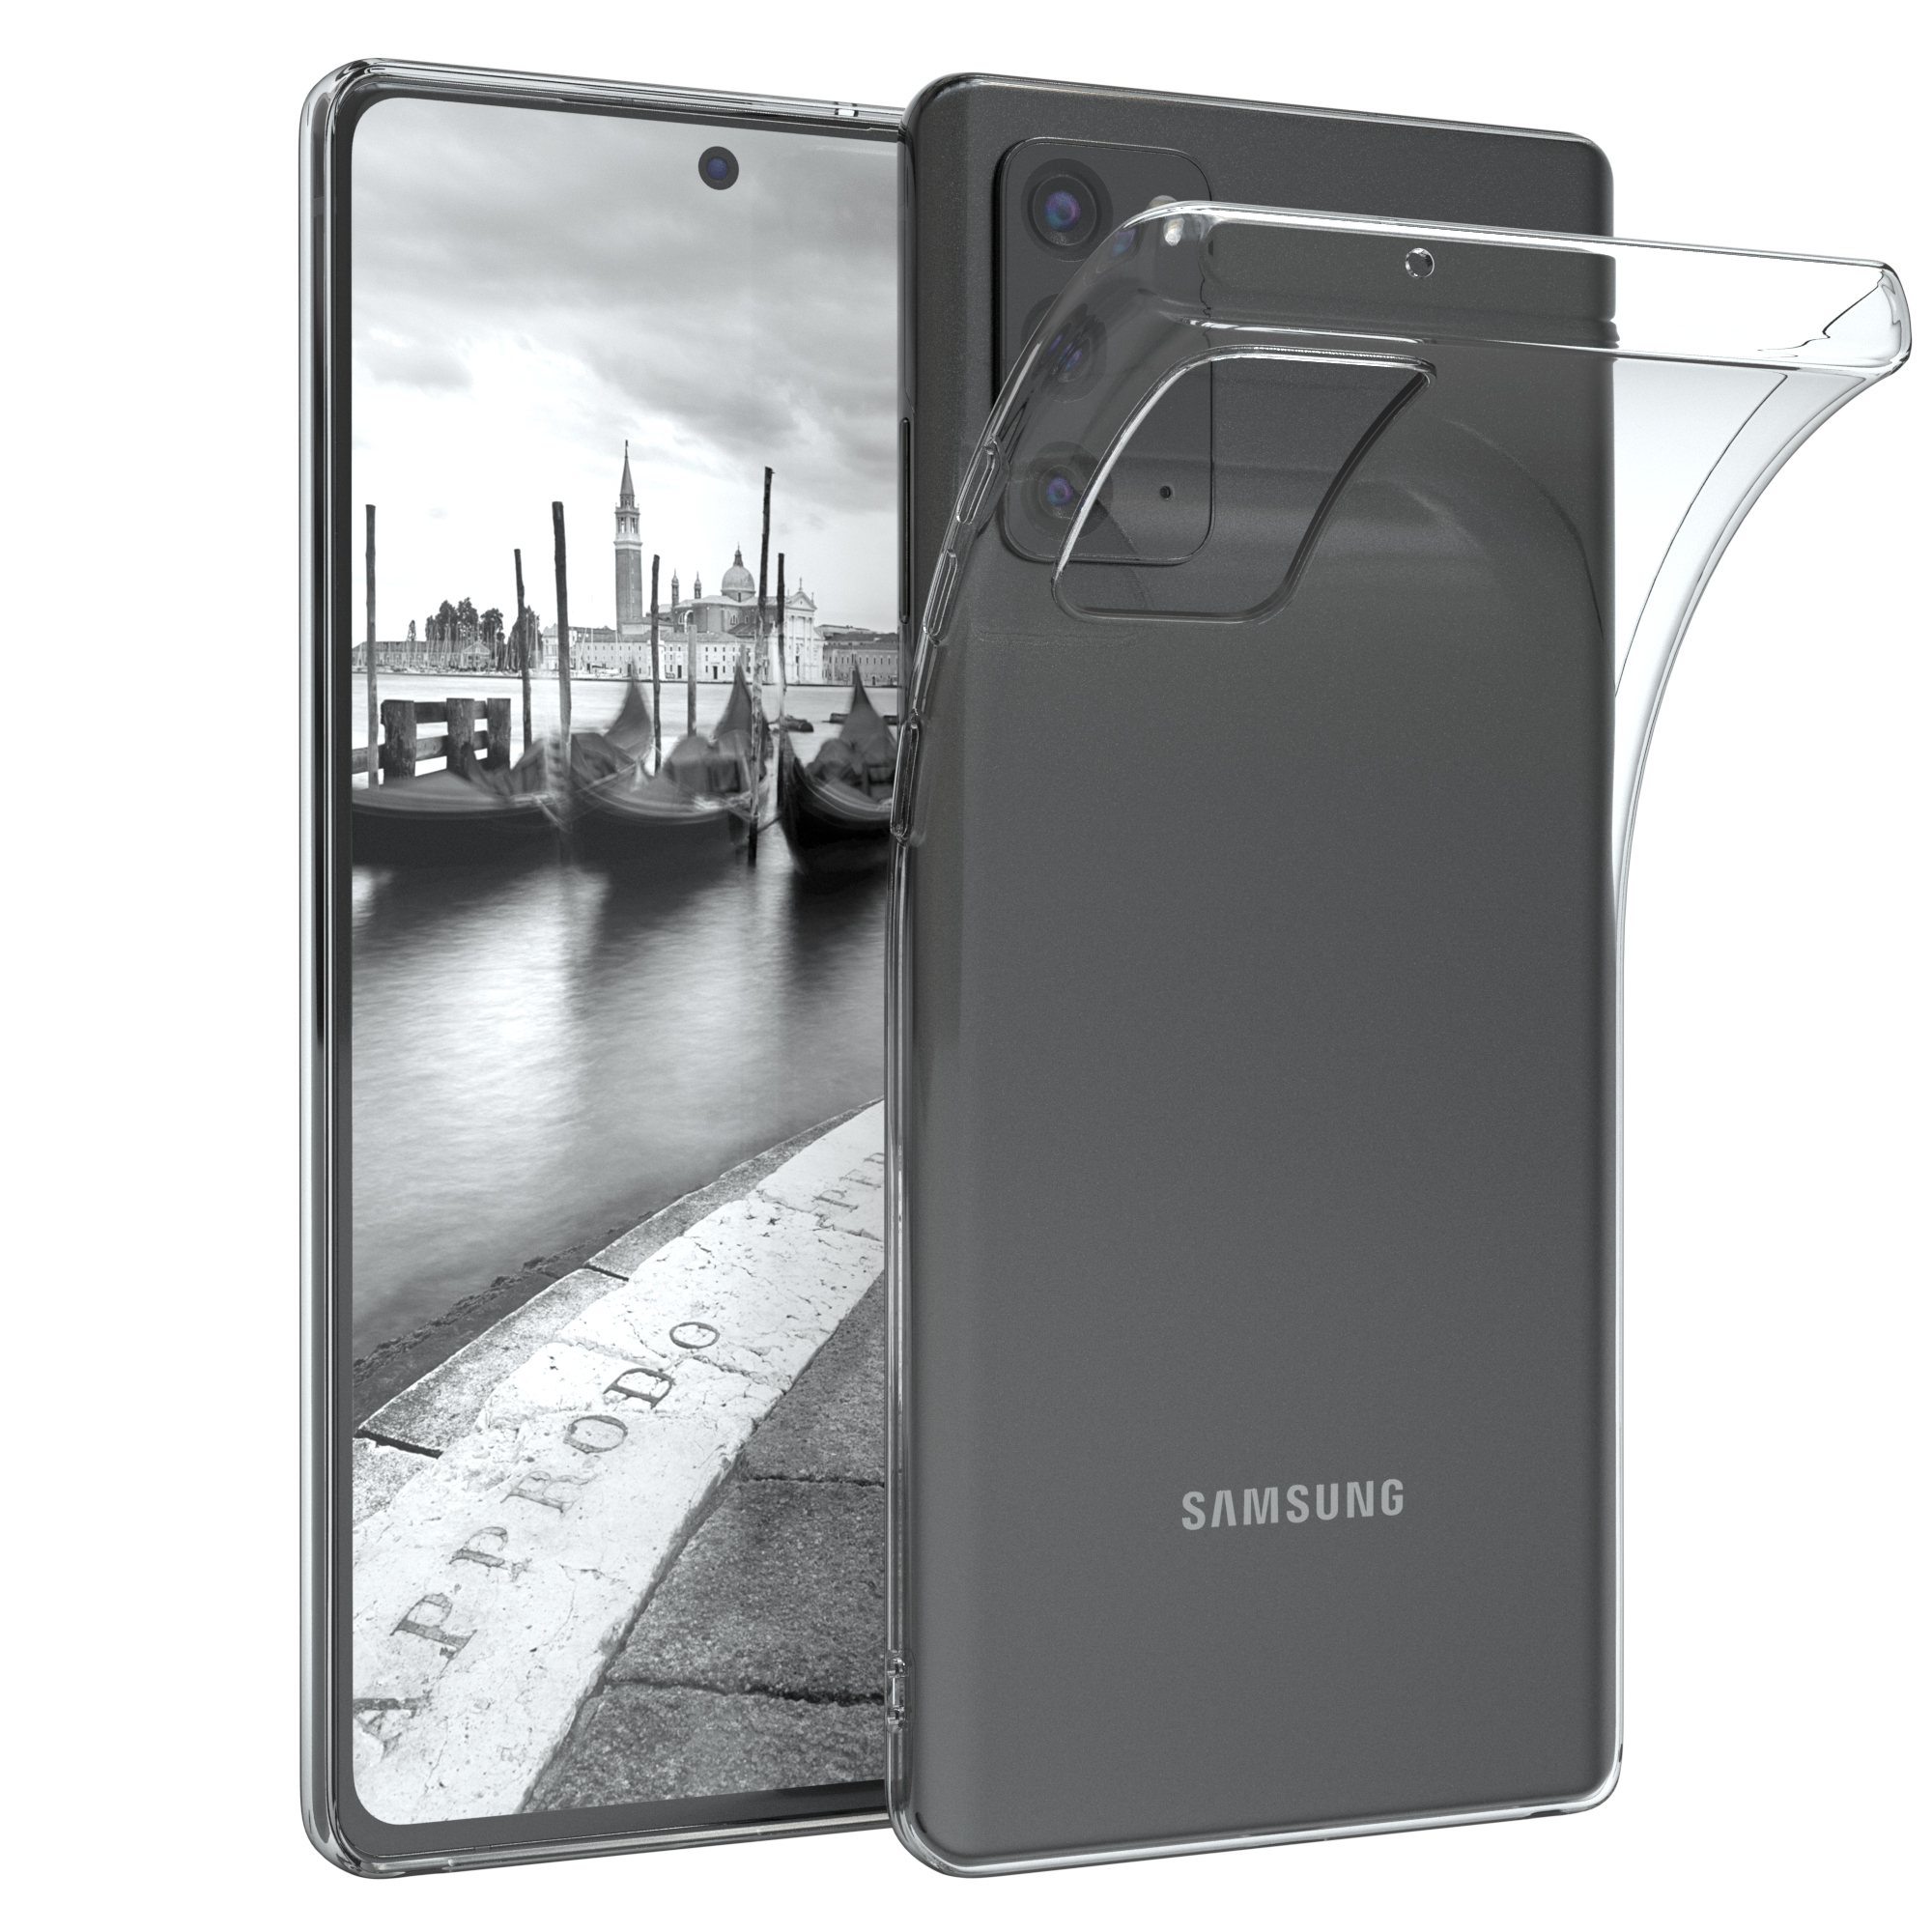 EAZY CASE Slimcover Clear, Backcover, / 20 Samsung, 20 Note Galaxy Note Durchsichtig 5G